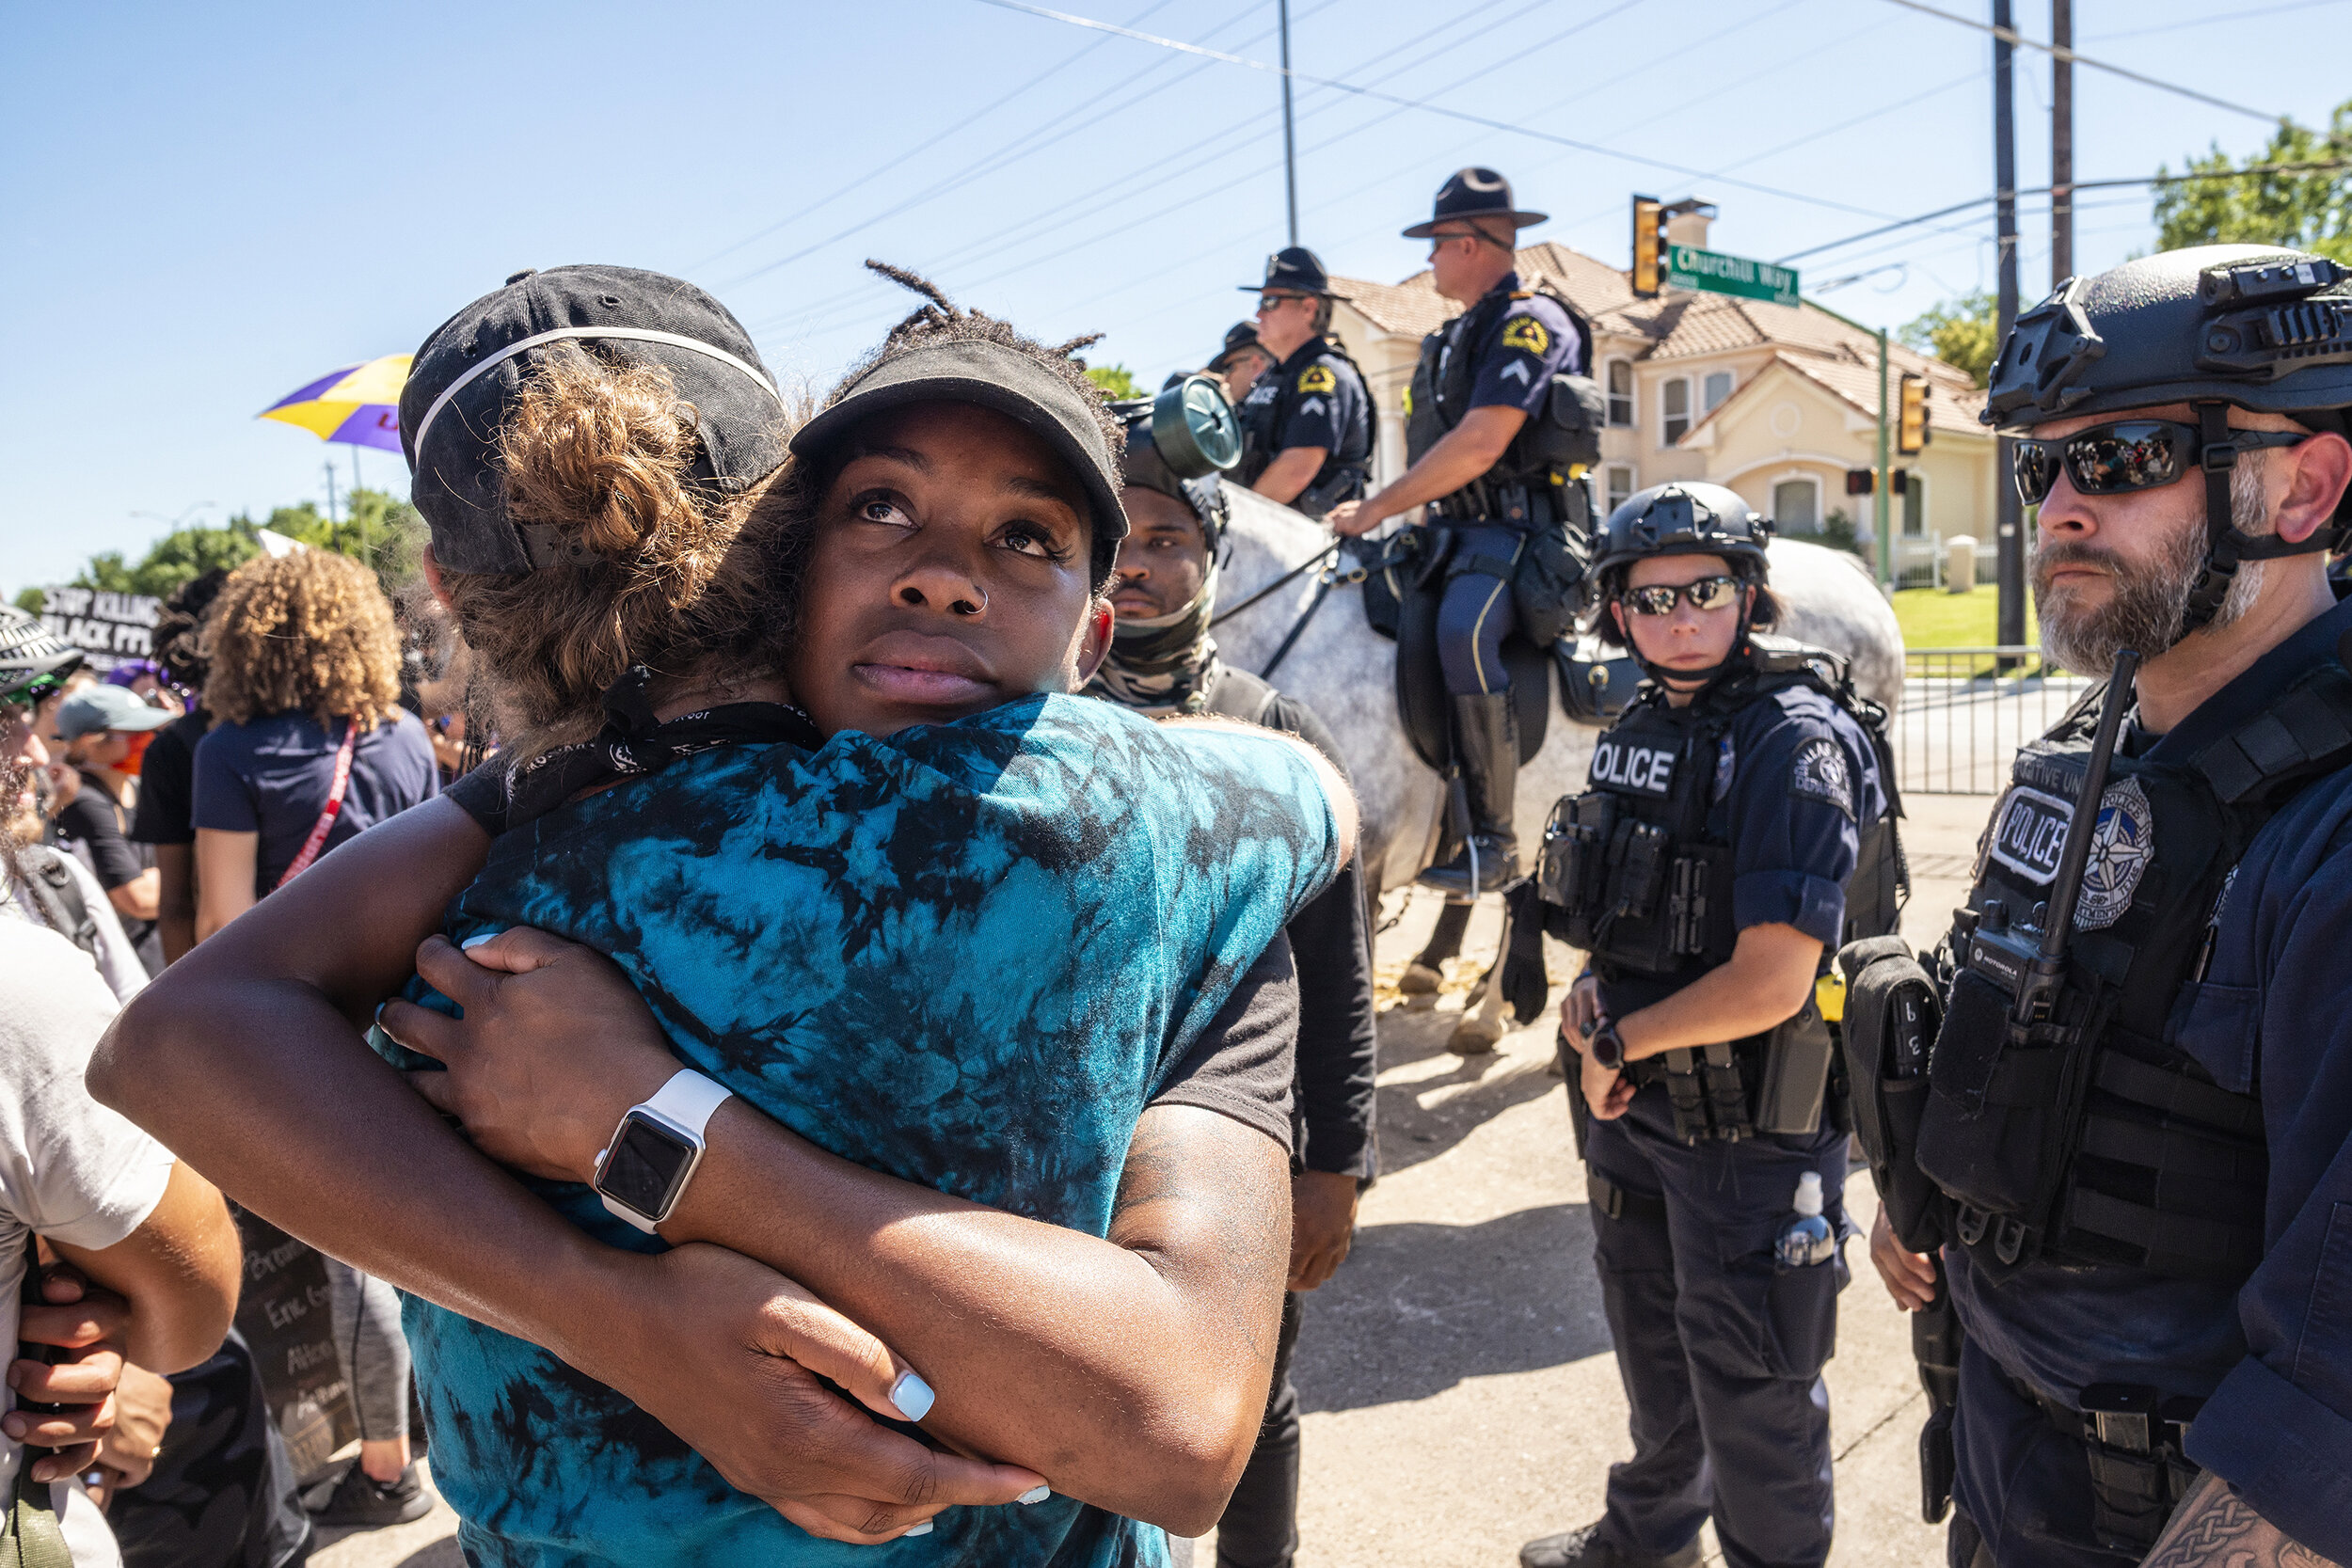  Protesters embrace at Hillcrest Road and Churchill Way ahead of President Donald Trump’s visit to Gateway Church in the Preston Hollow neighborhood of Dallas, TX on June 11, 2020.  Under heavy security, the protest remained peaceful. 